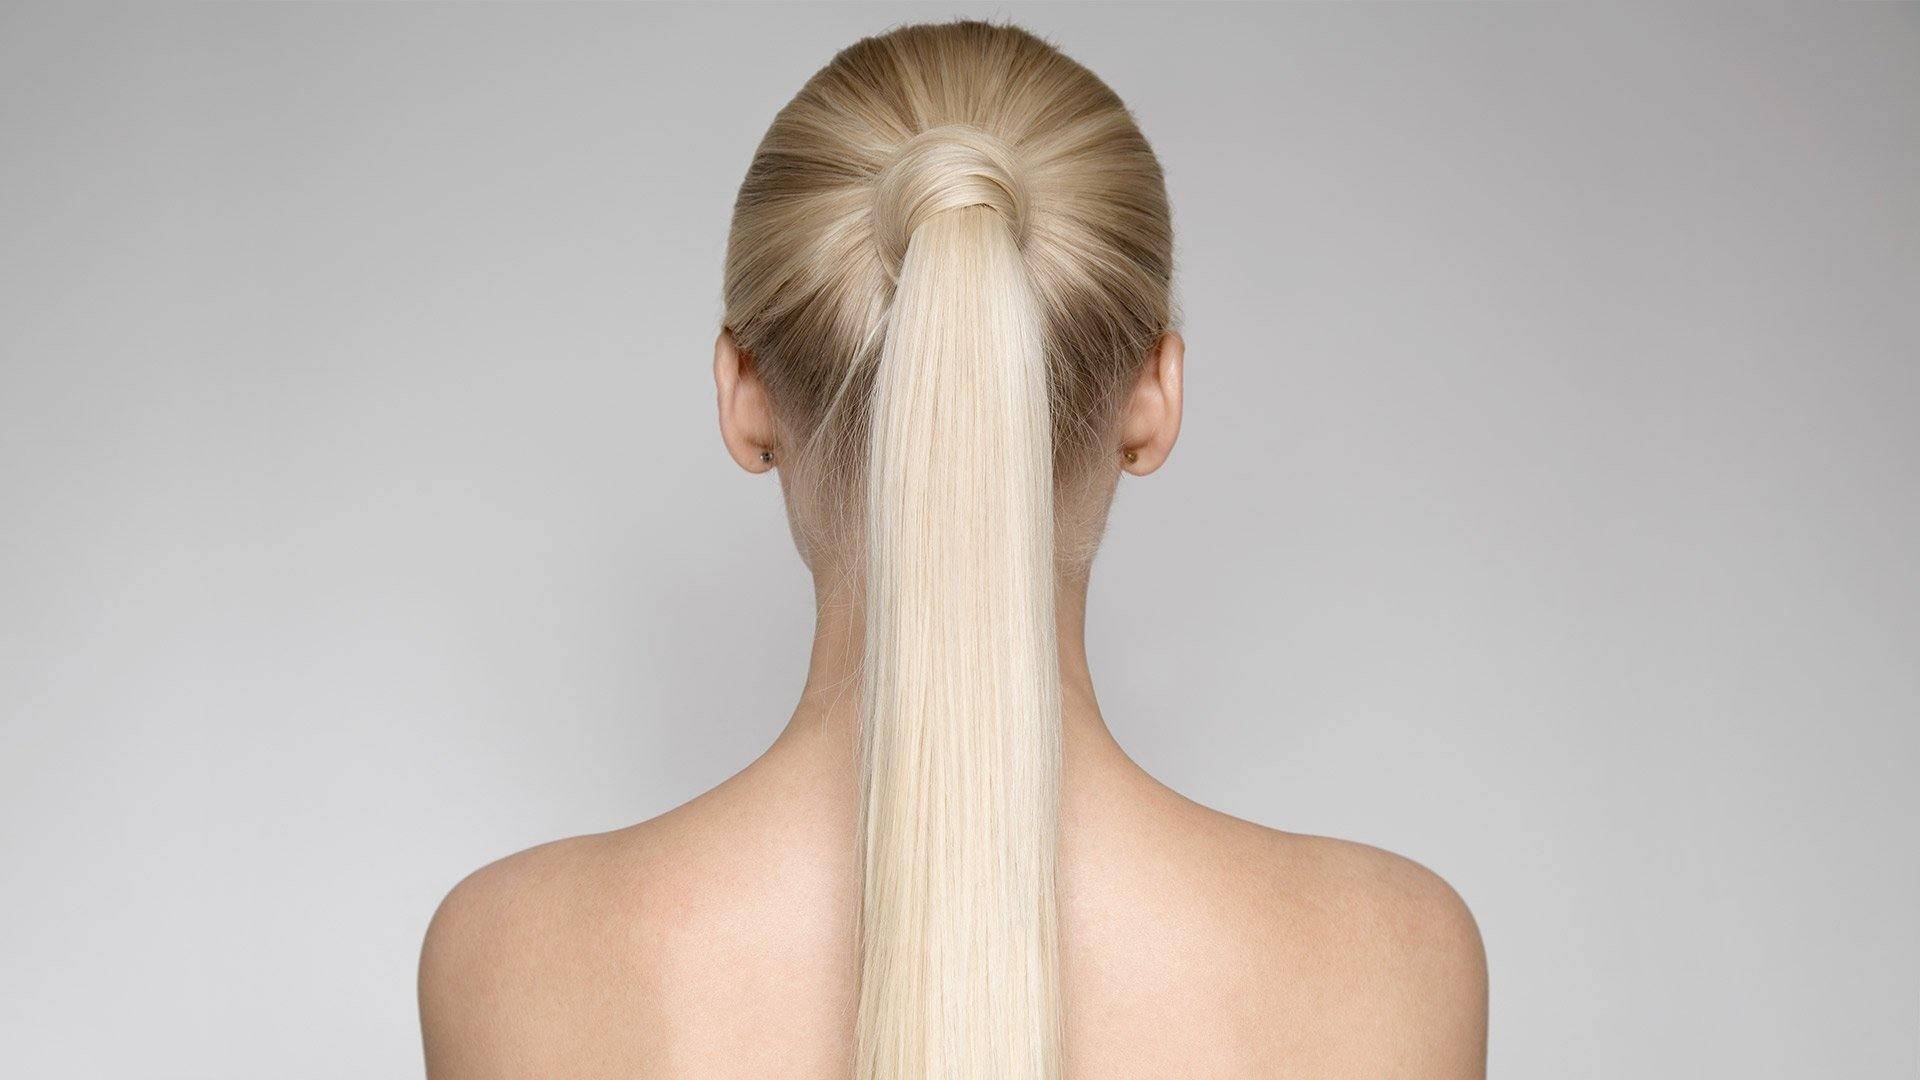 Loreal Paris Article How To Do A Ponytail That Looks Perfect Every Time D